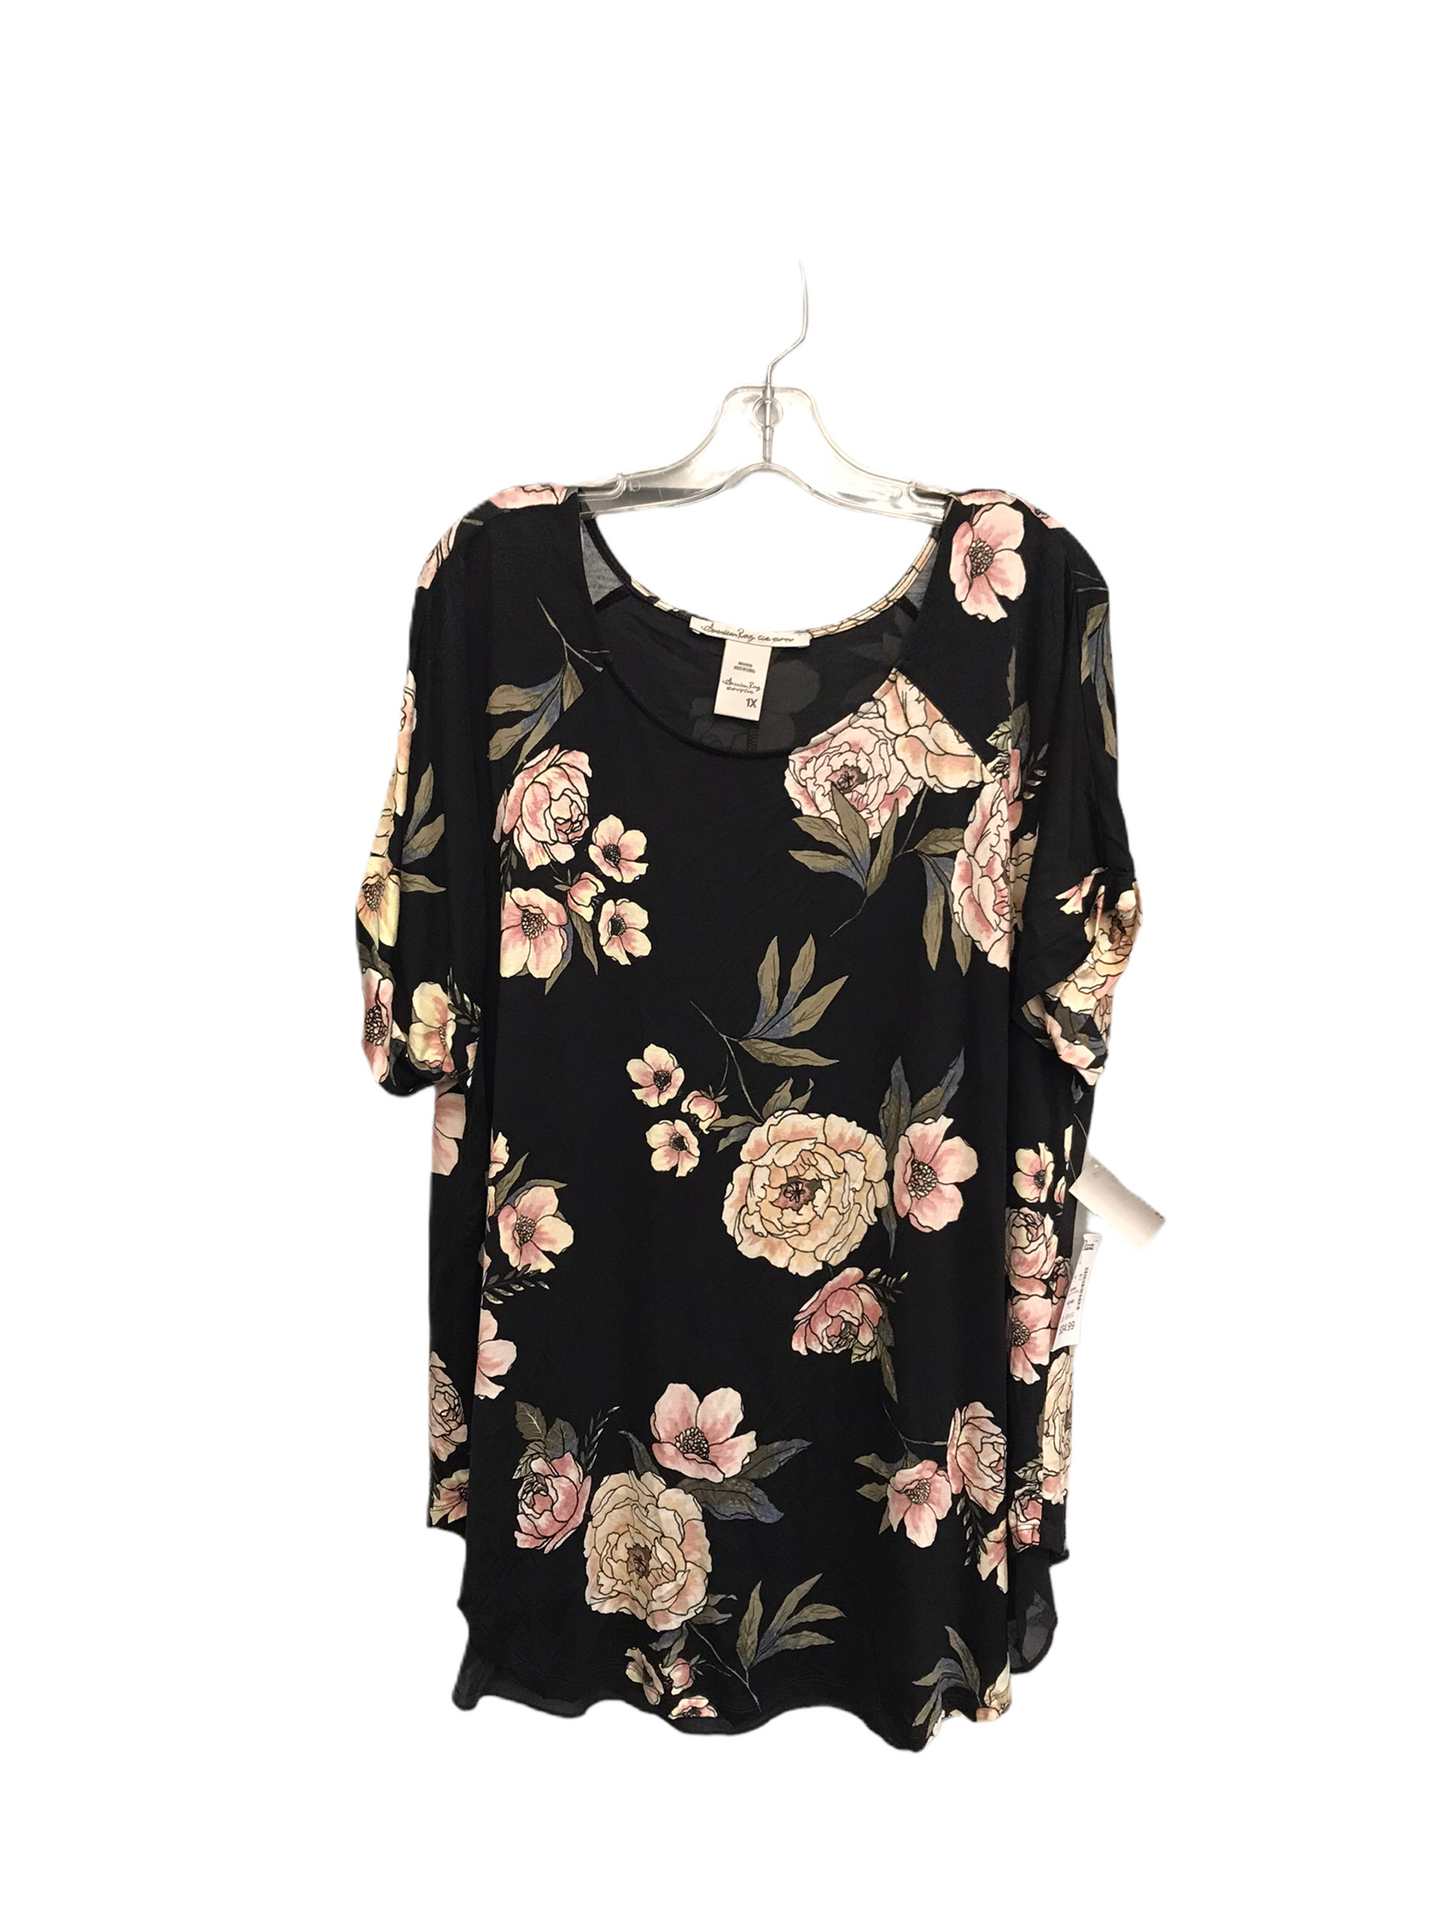 Floral Print Top Short Sleeve By American Rag, Size: 1x